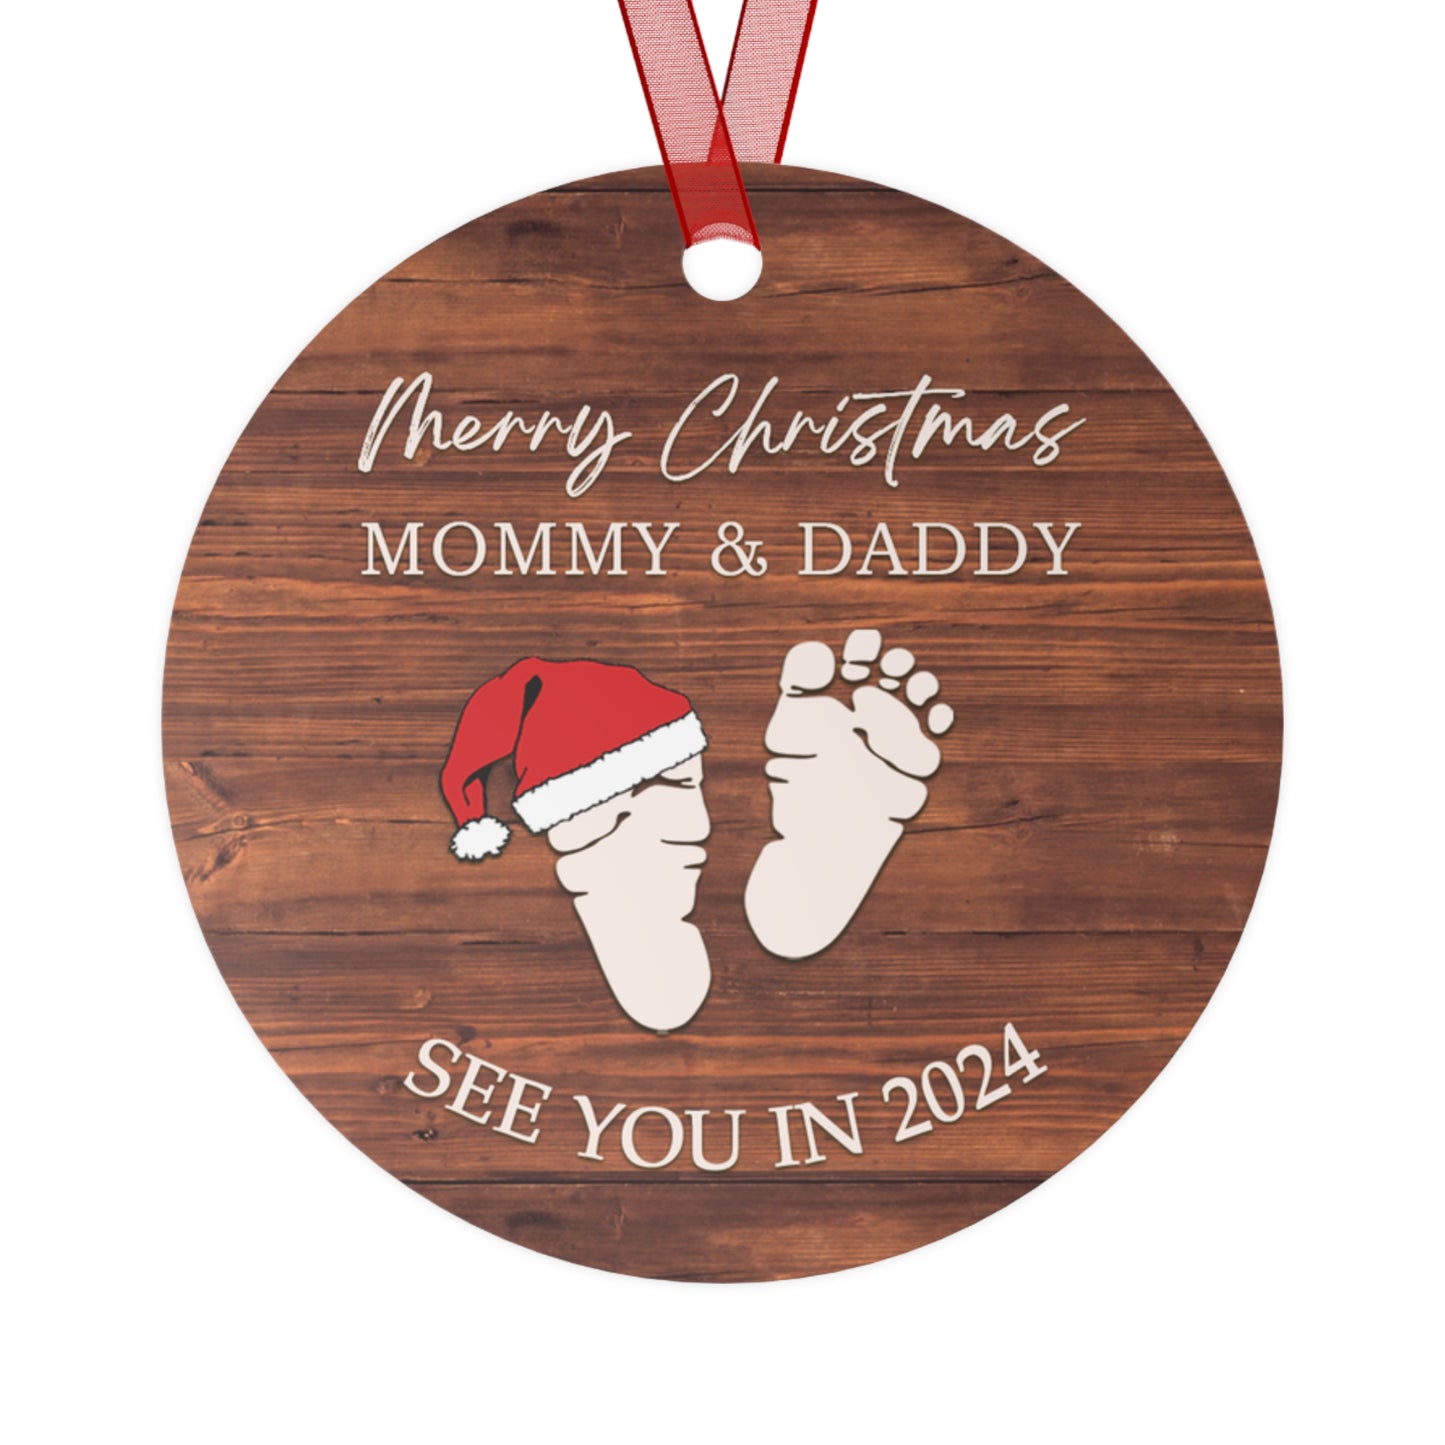 Future Mommy & Daddy Ornament